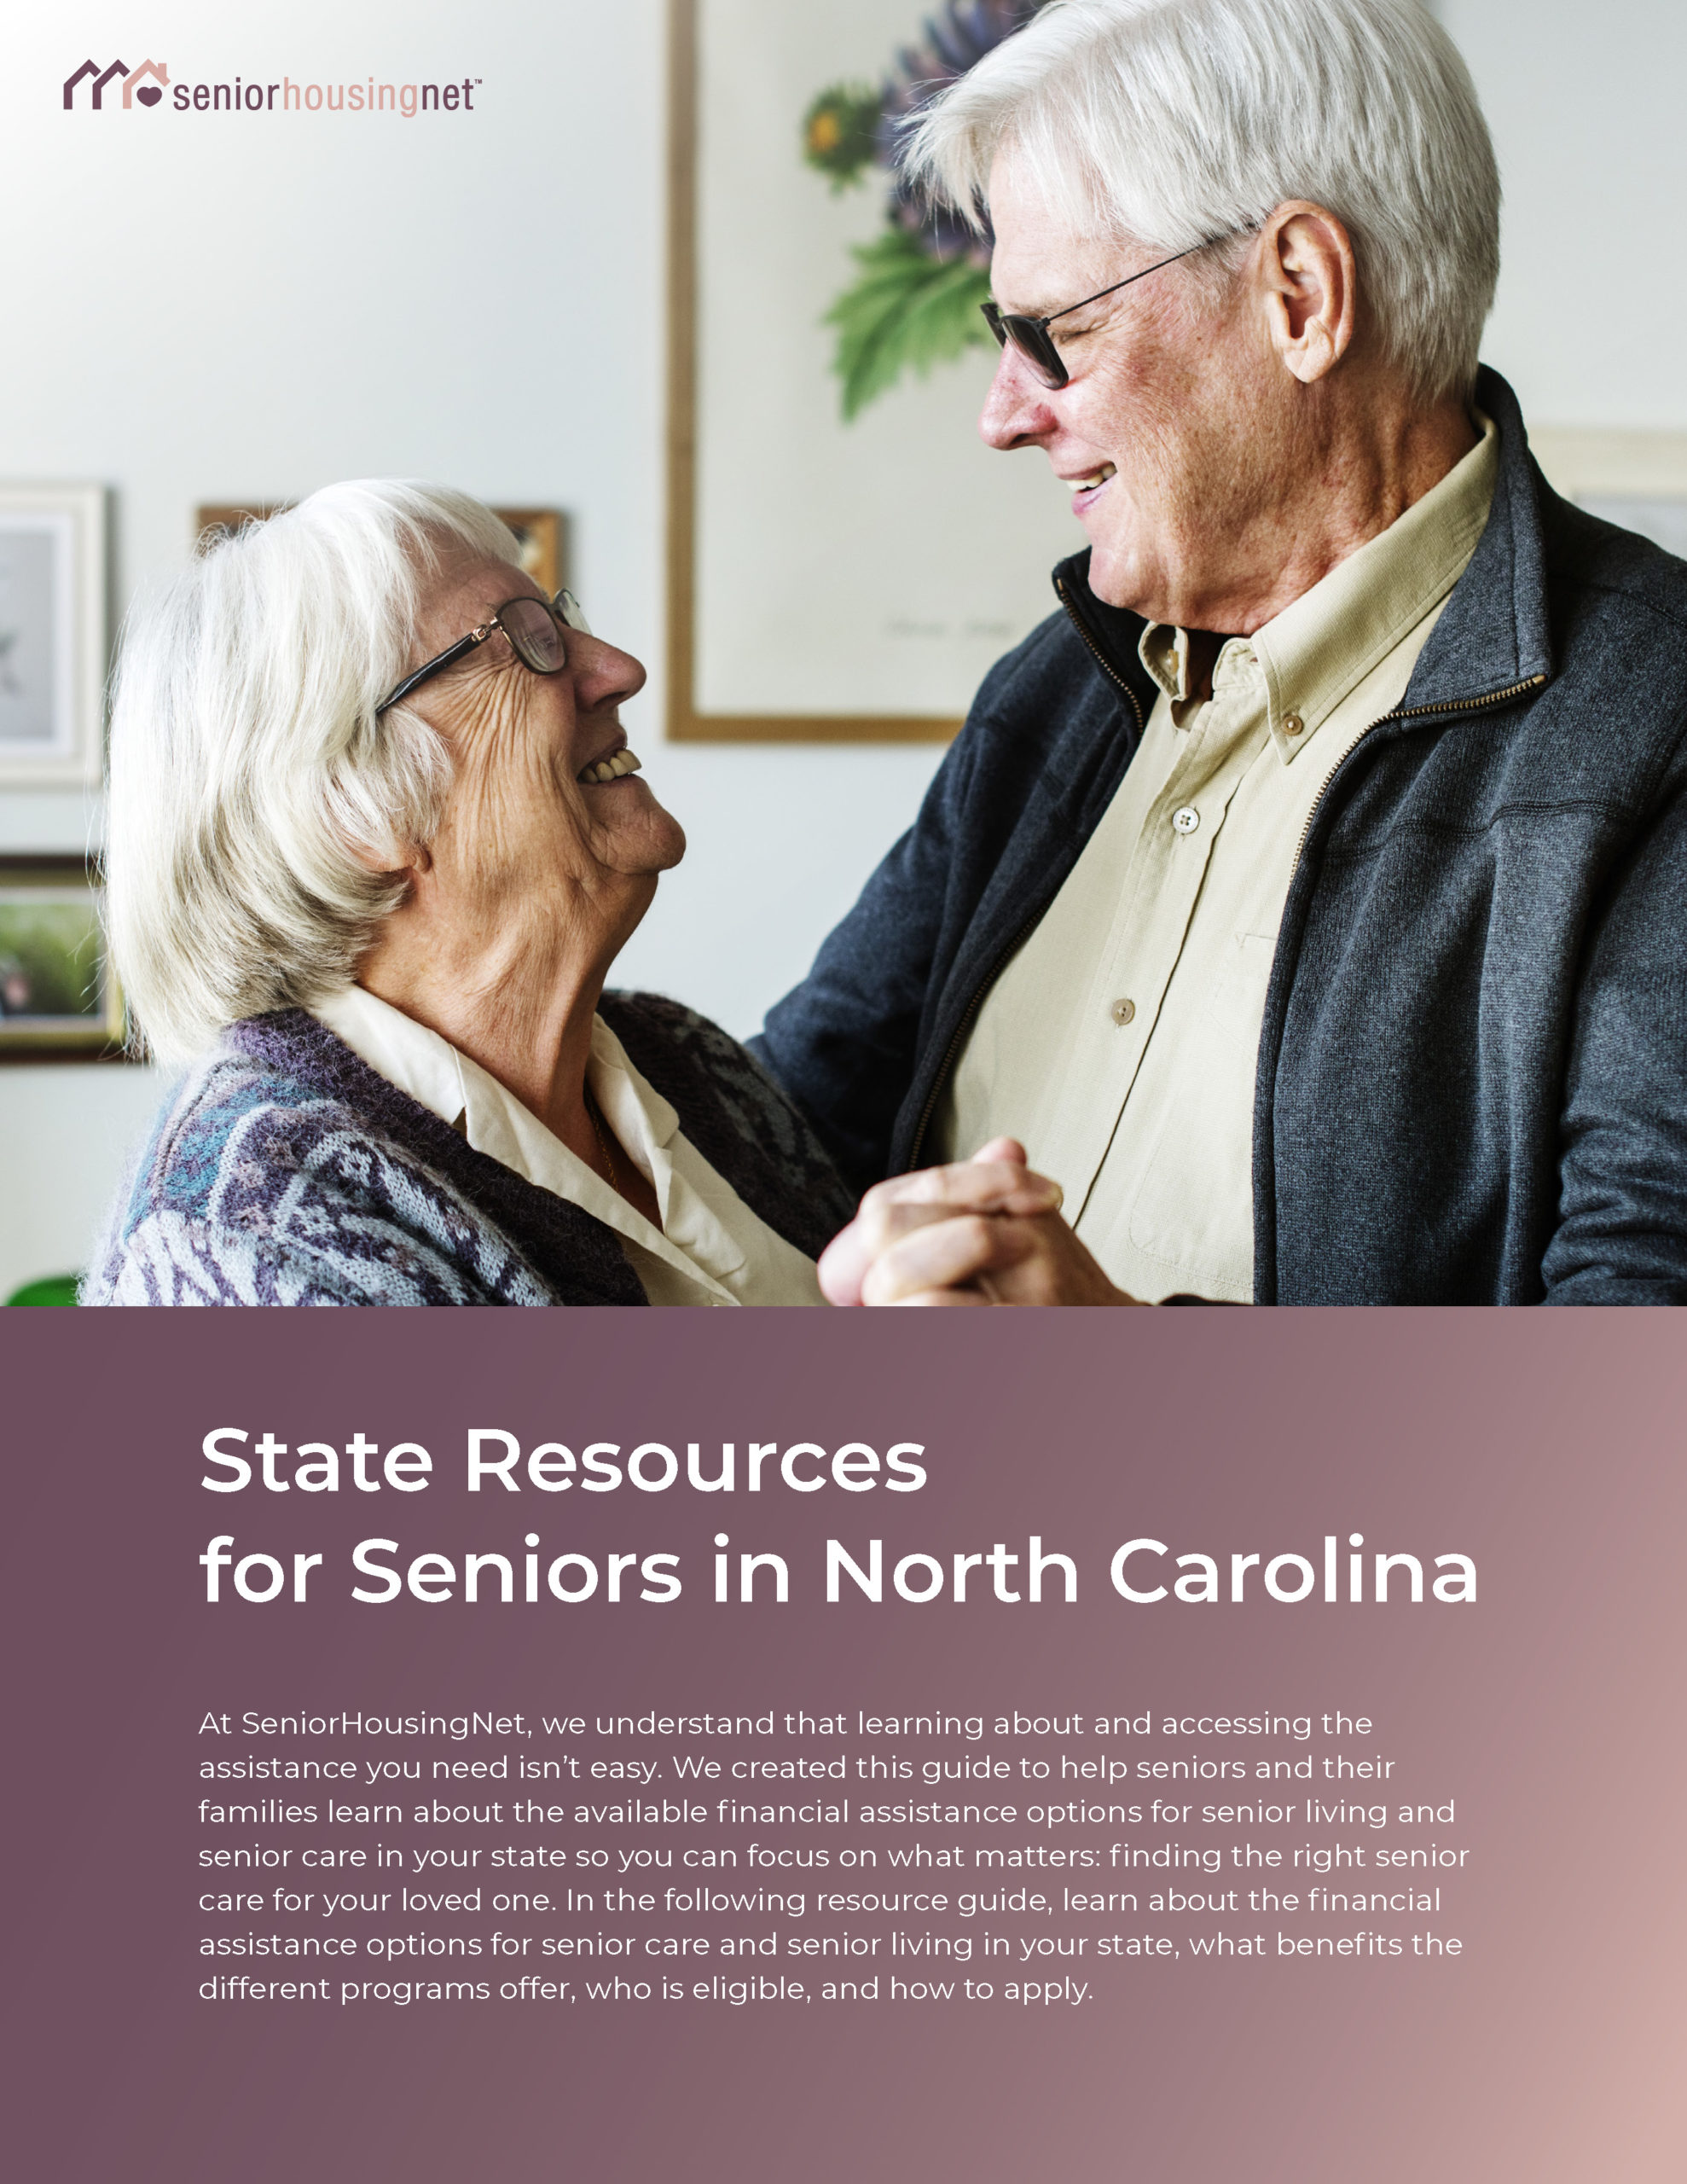 State Resources for Seniors in North Carolina